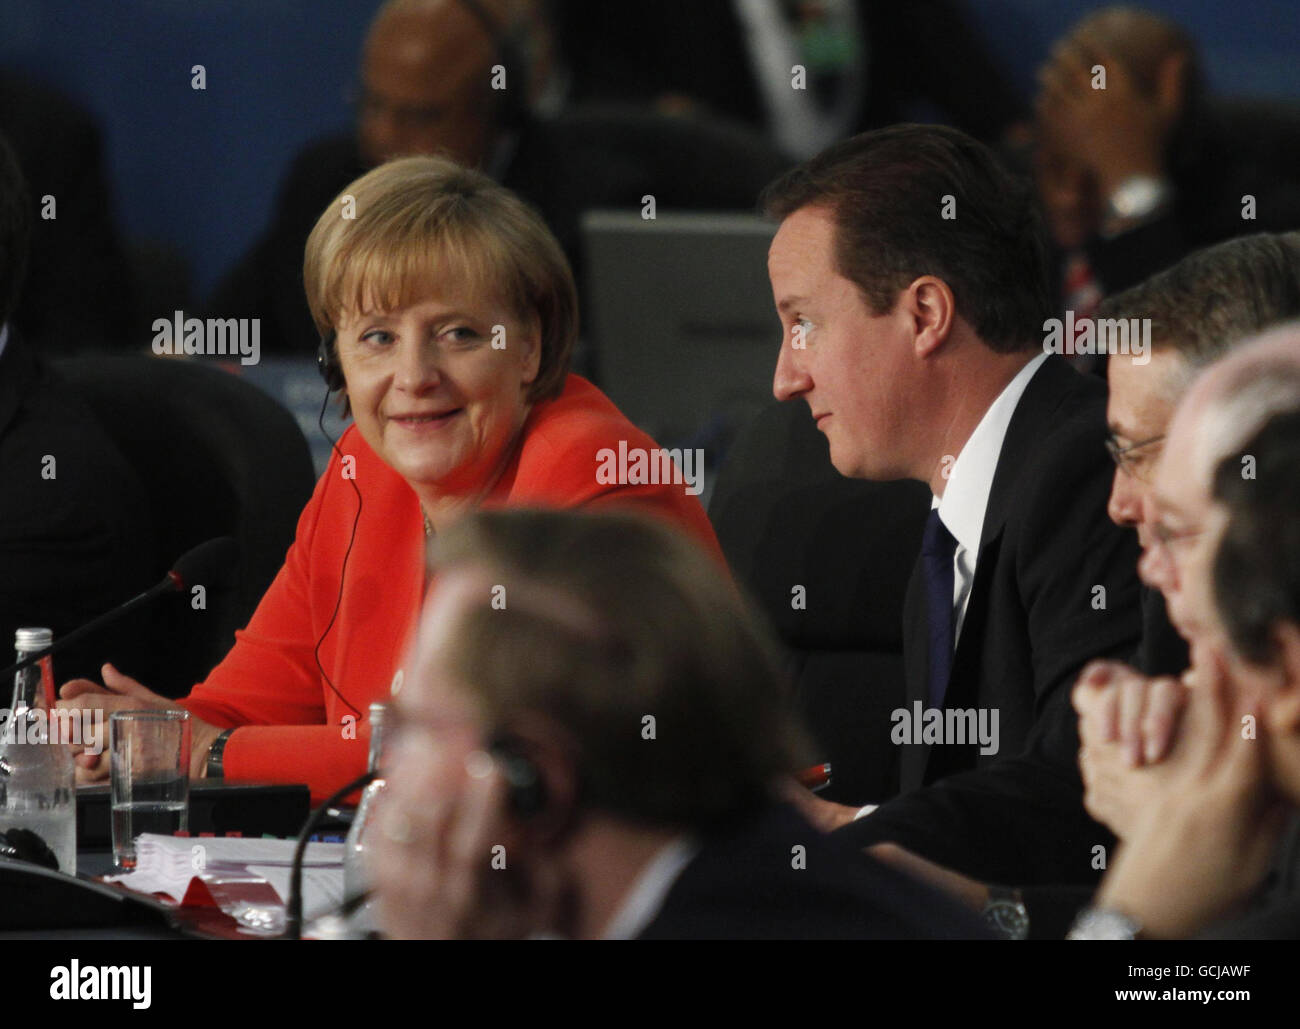 Prime Minister David Cameron, (right), Germany's Chancellor Angela Merkel, (left), attend the opening session of the G20 nations summit in Toronto, Canada. Stock Photo